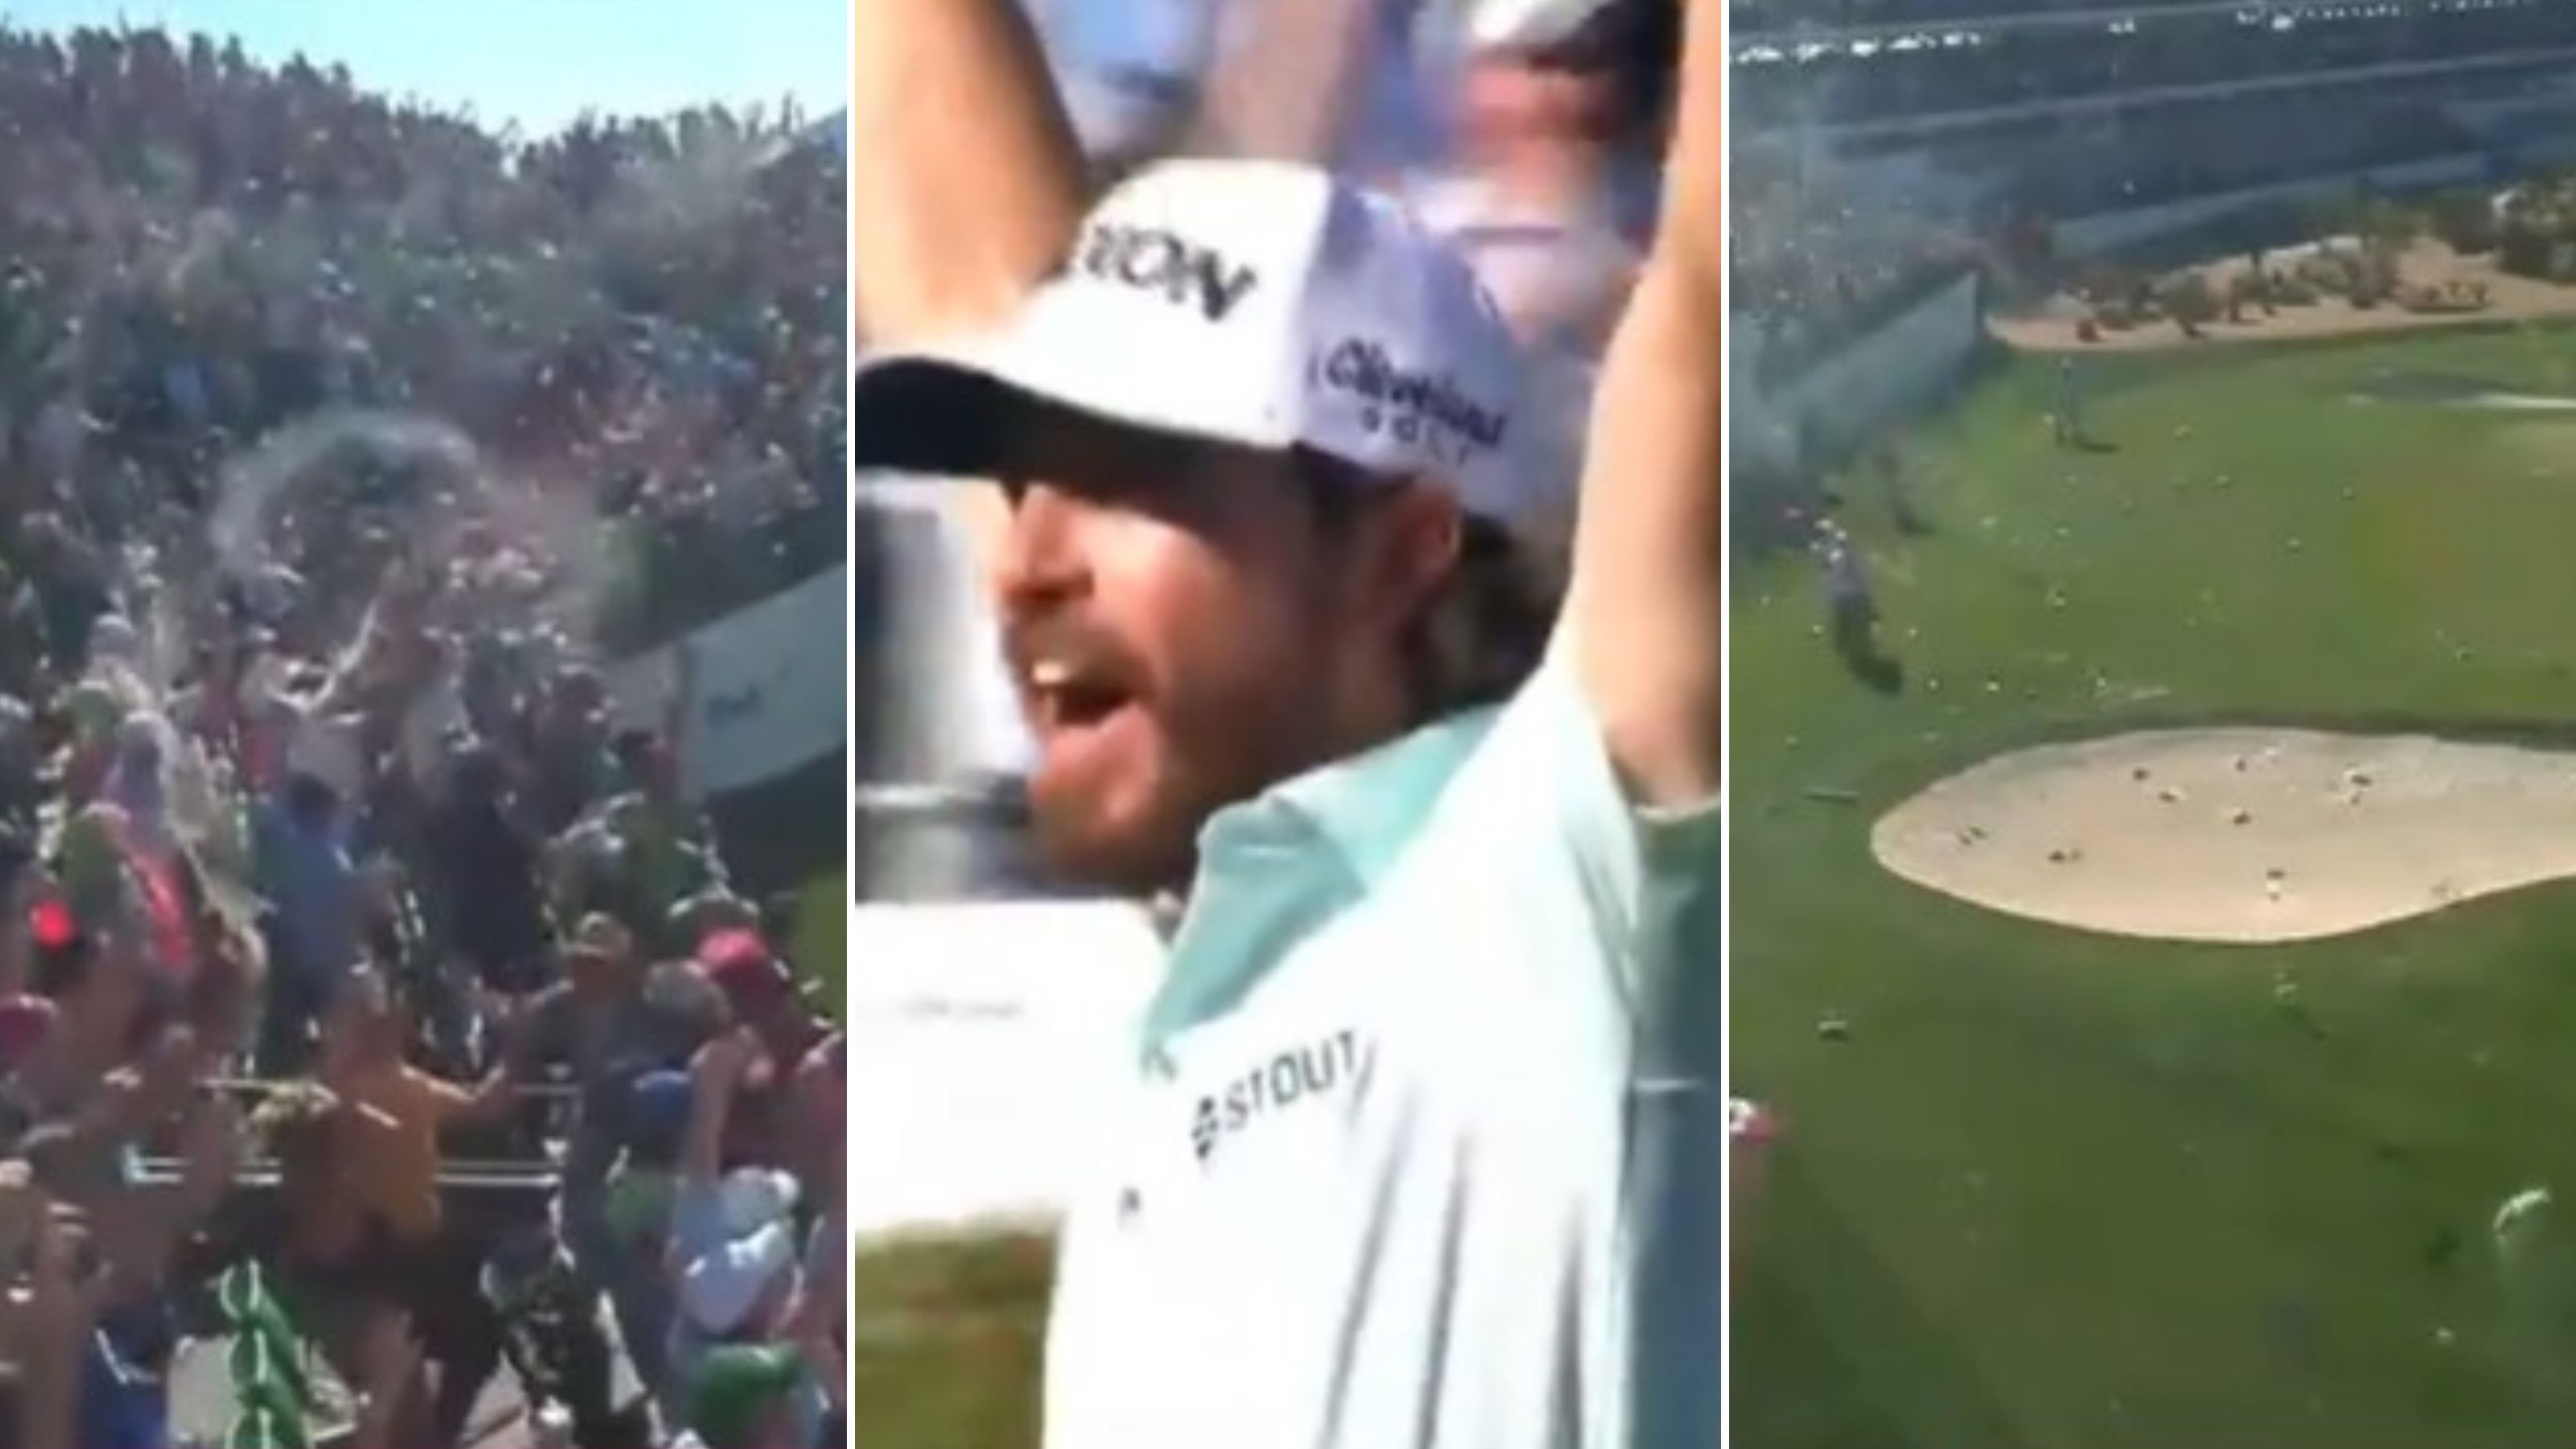 The Phoenix Open crowd went wild when Sam Ryder aced the 16th hole.